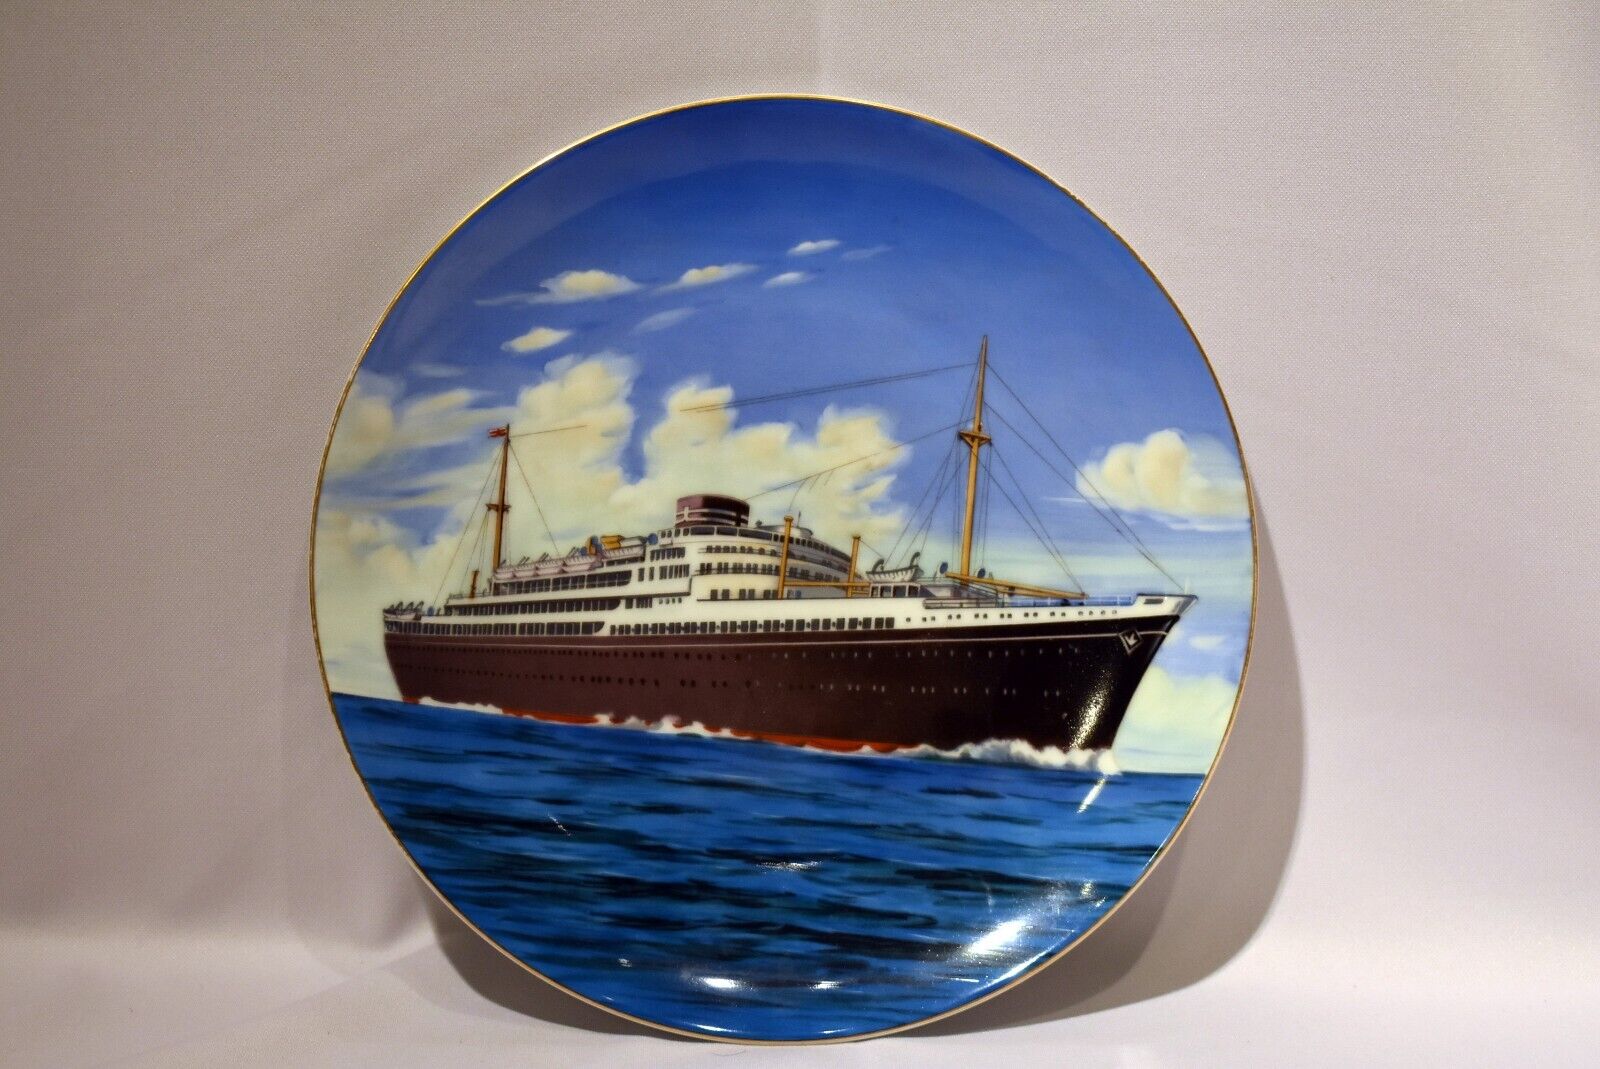 Mitsui O.S.K. Lines, Ltd. souvenir plate depicting an ocean liner to front 10 in